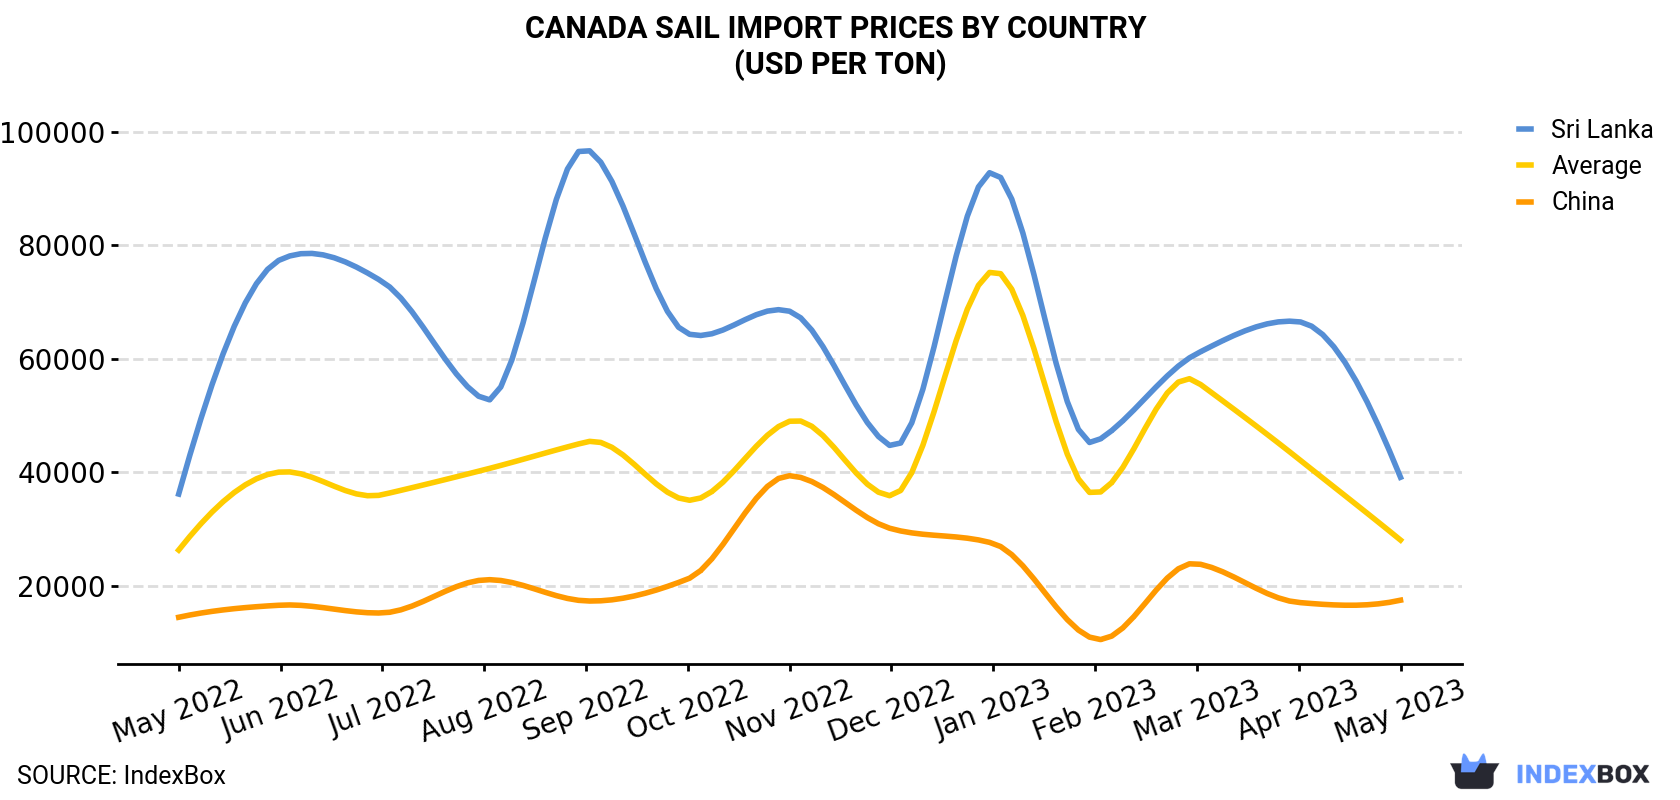 Canada Sail Import Prices By Country (USD Per Ton)